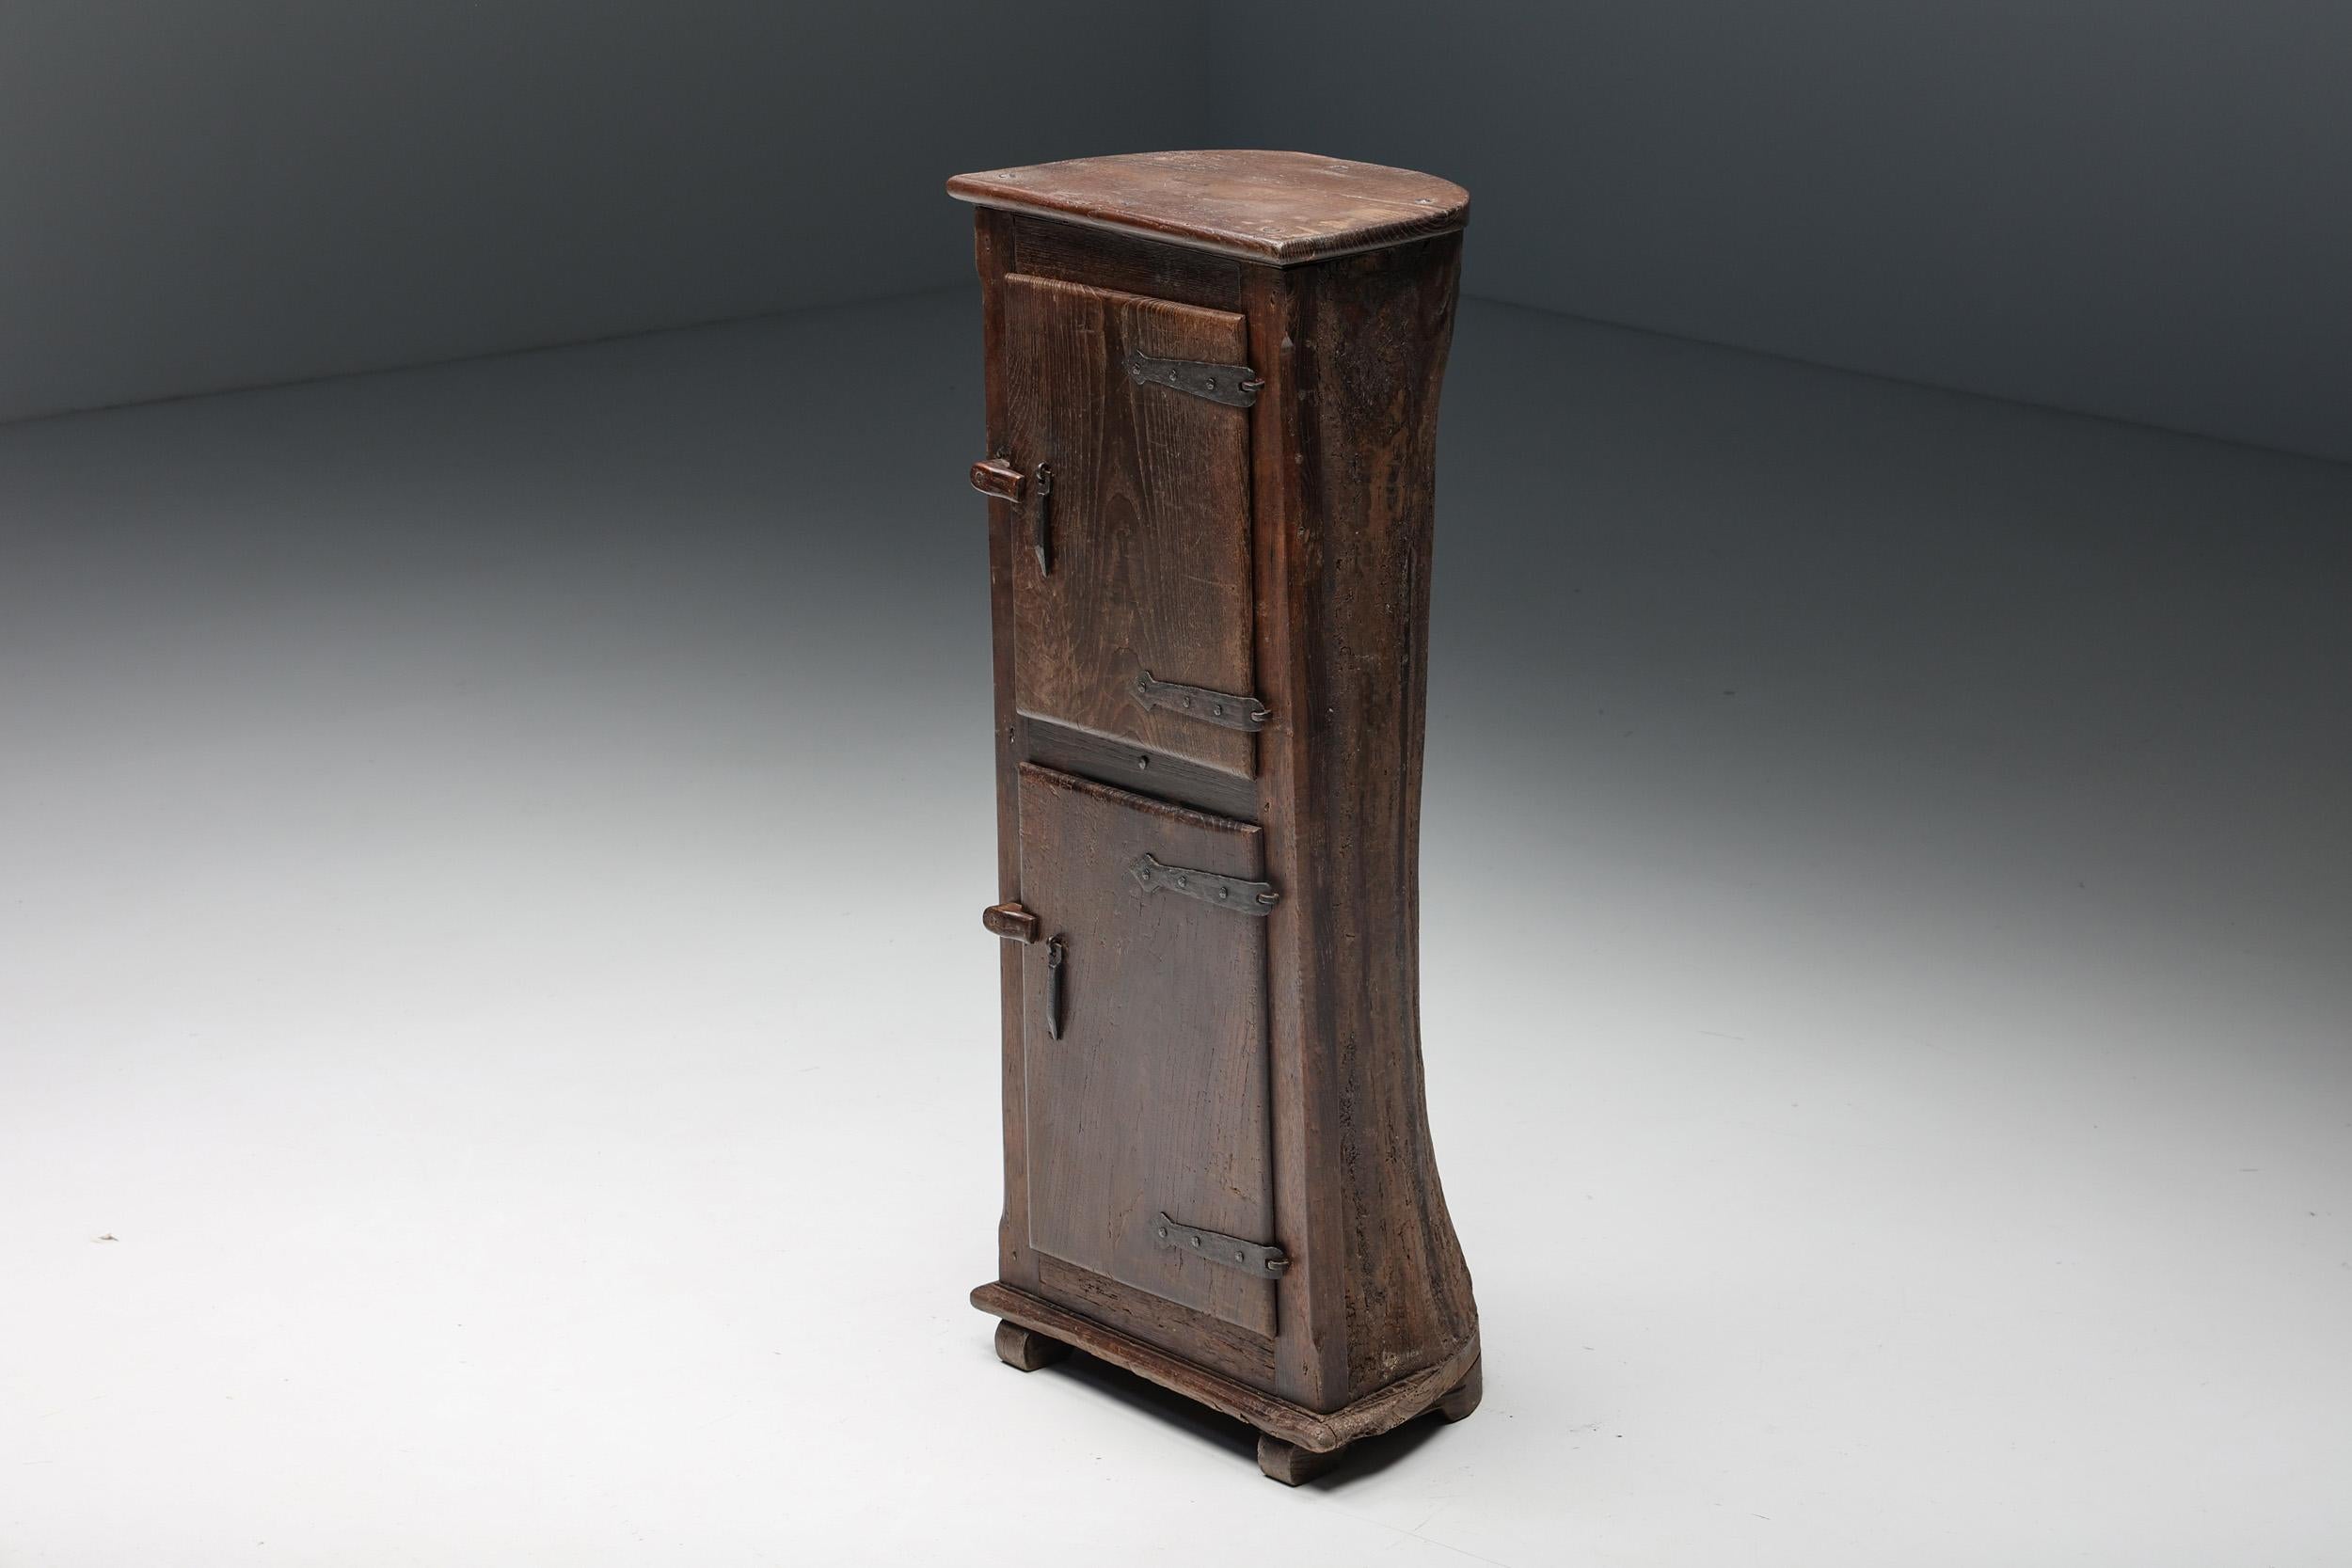 Robust; Rustic; cupboard; Wabi Sabi; doors; Solid Chestnut; Spain; early 20th century;

20th-century, art populaire, folk art, monoxylite cupboard made of solid chestnut wood. This rustic, organic cabinet provides sufficient storage space with